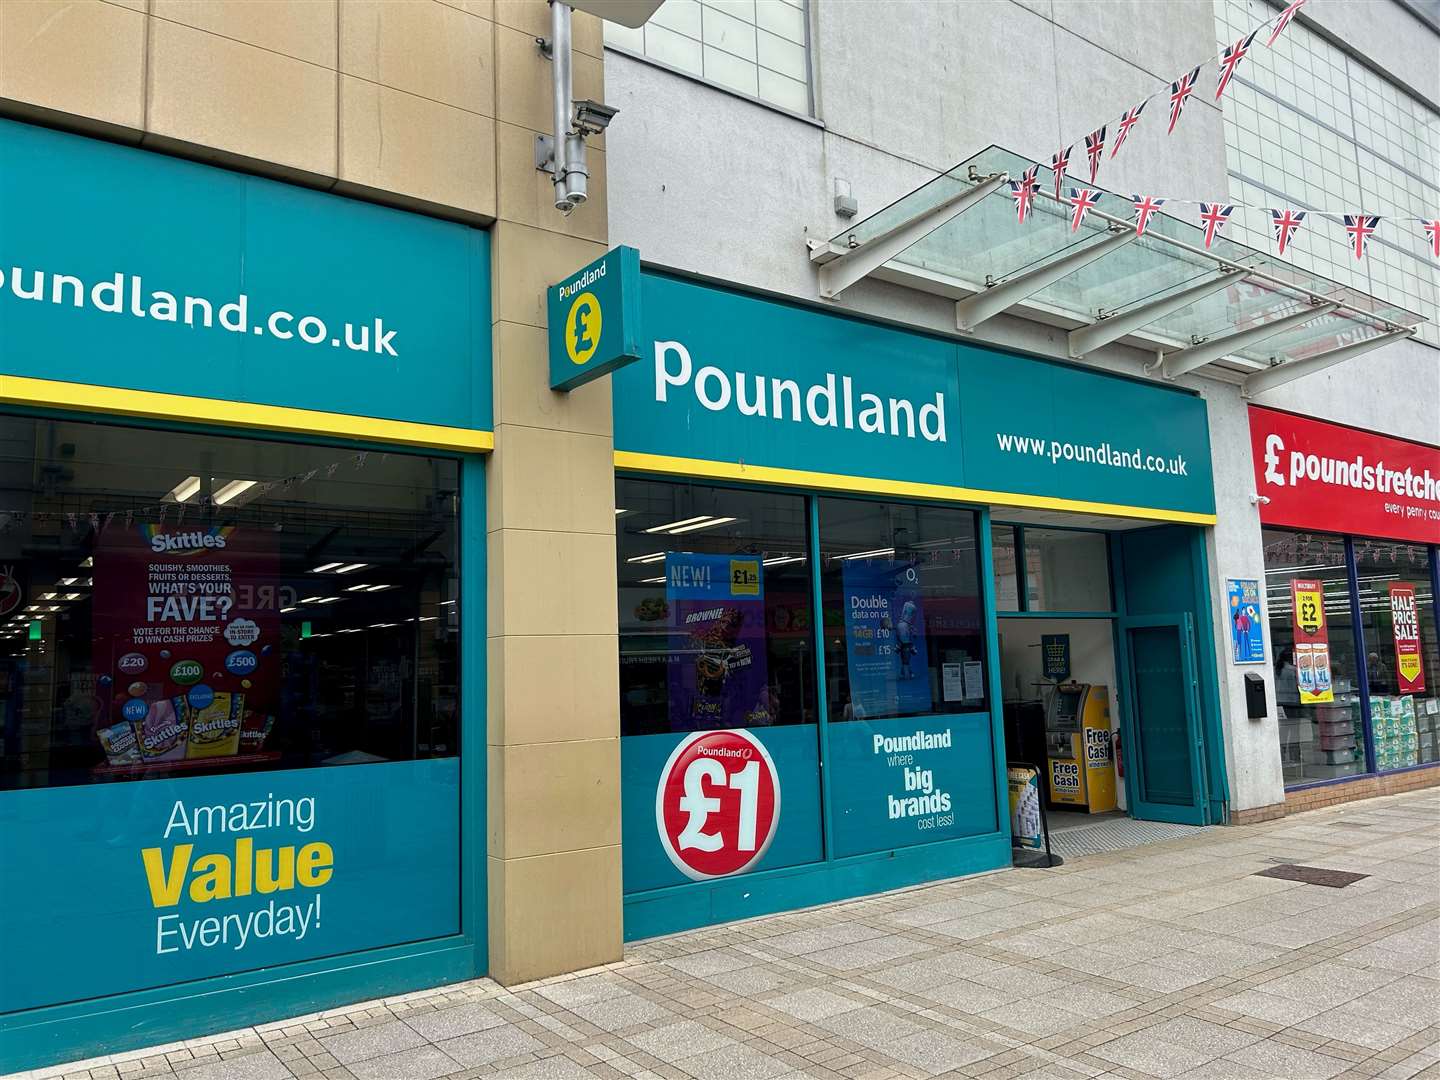 Kemp stole from Poundland on Broad Street in Lynn